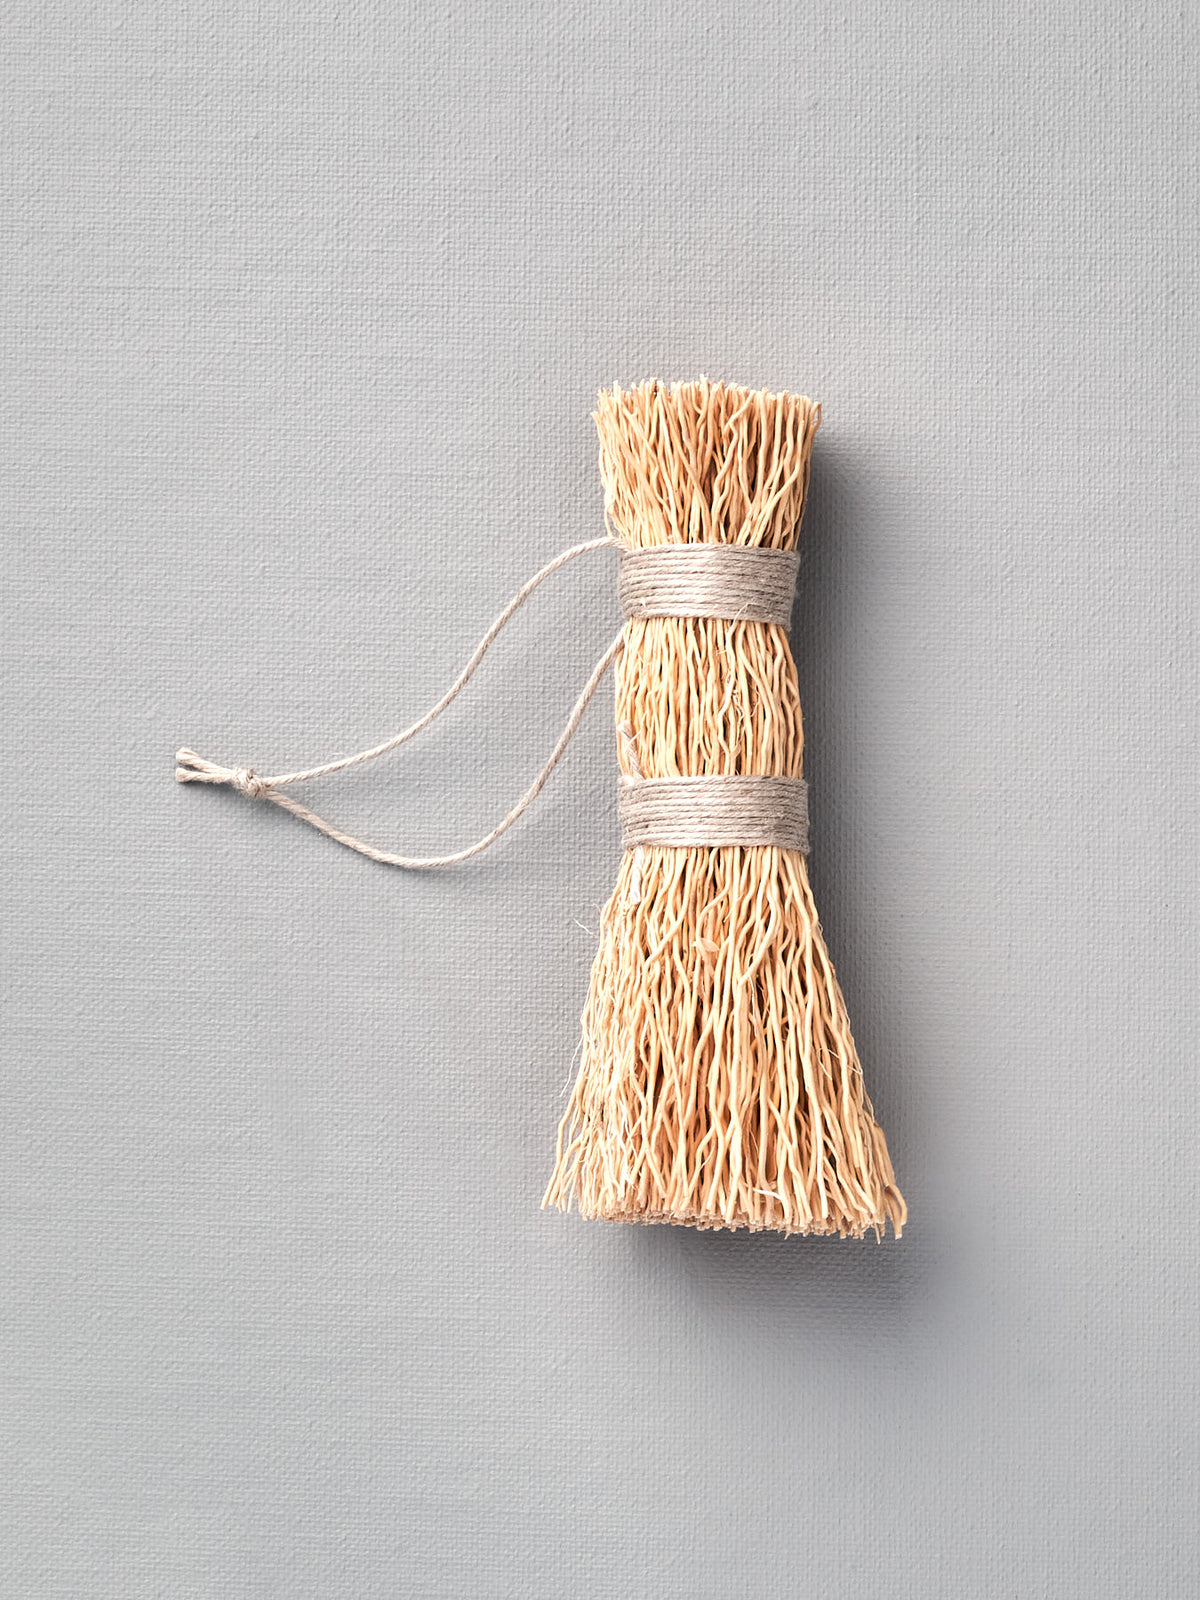 An Iris Hantverk Washing-up Whisk with a string attached to it.